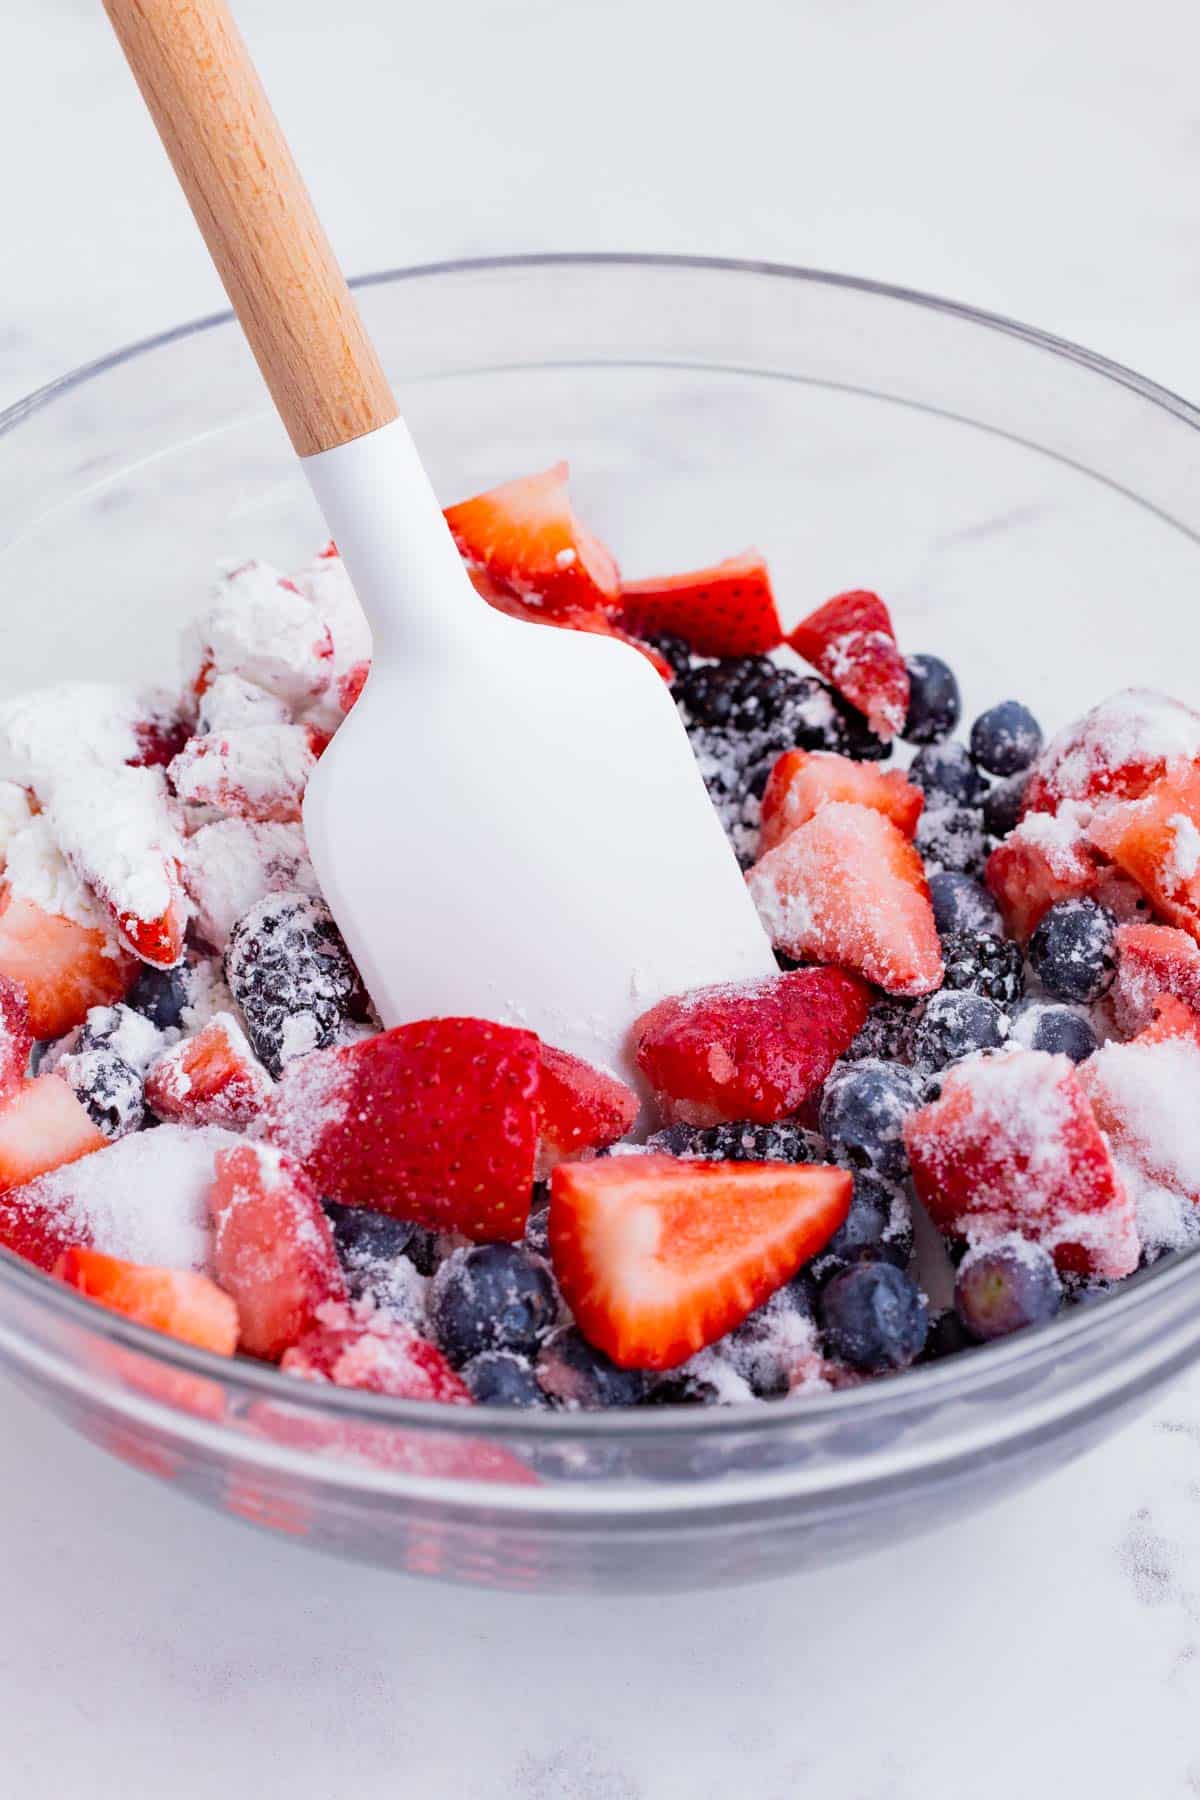 Cornstarch and sugar are added to the berries.